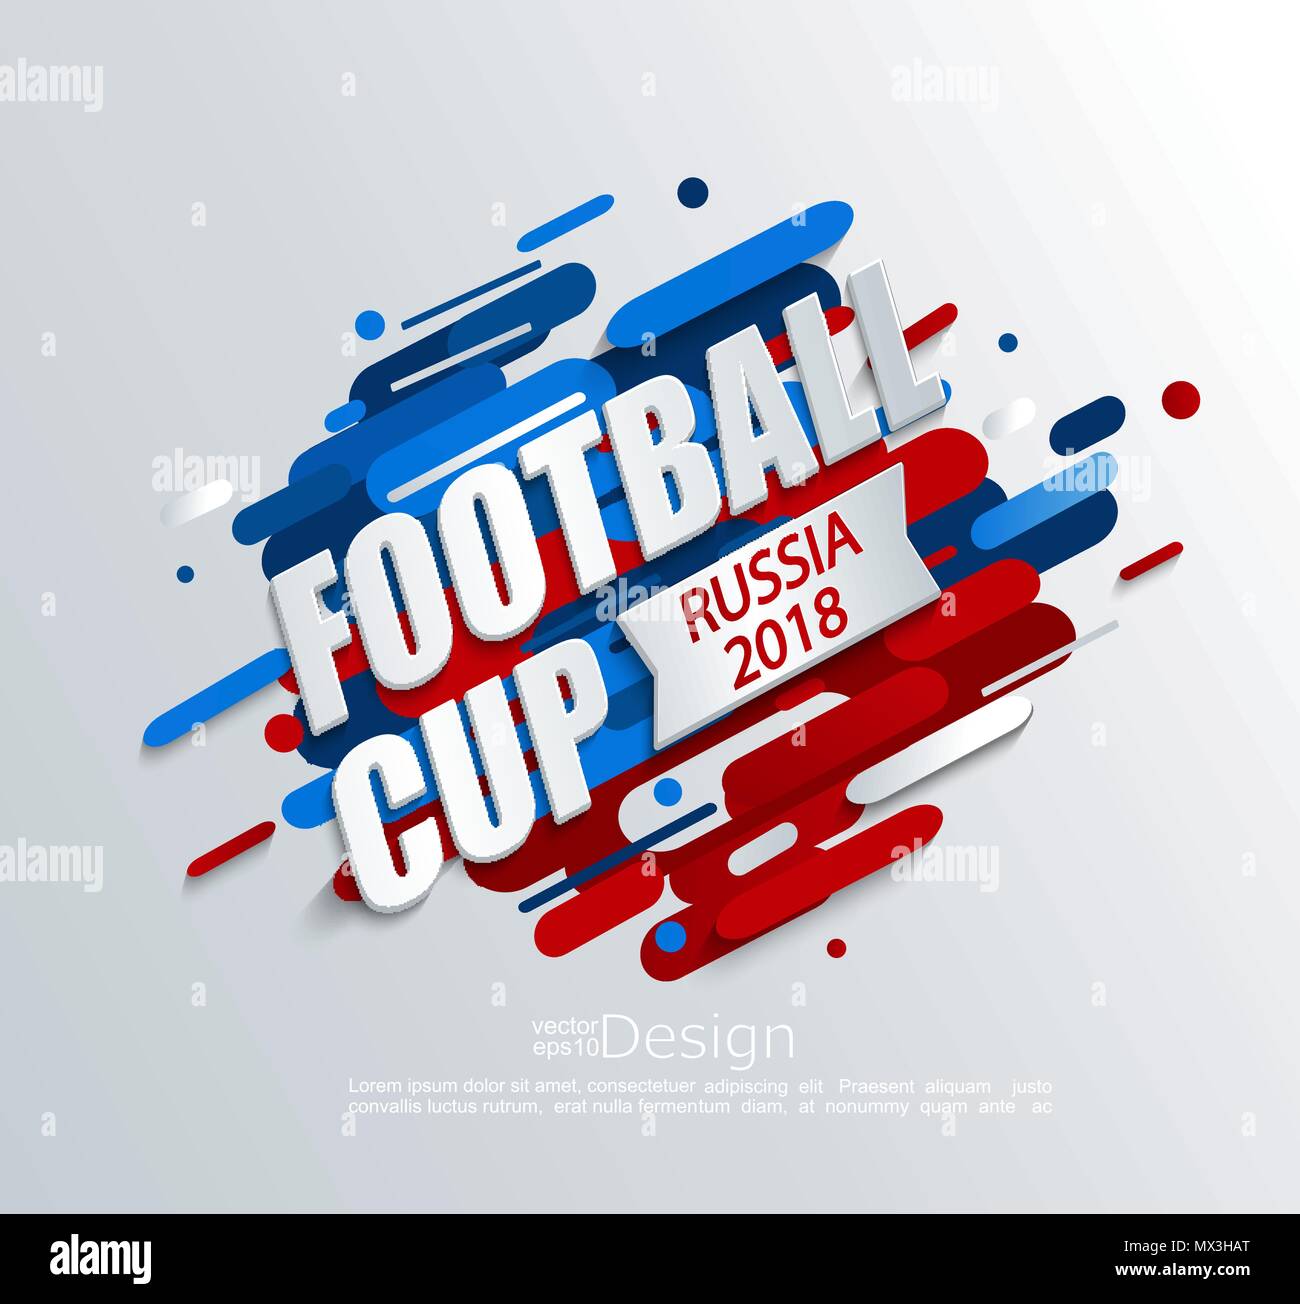 Vector illustration for a football cup 2018 on dynamic background. For the soccer championship.Perfect for design cards, invitations, gift cards, flyers, brochures, banners and so on. Stock Vector